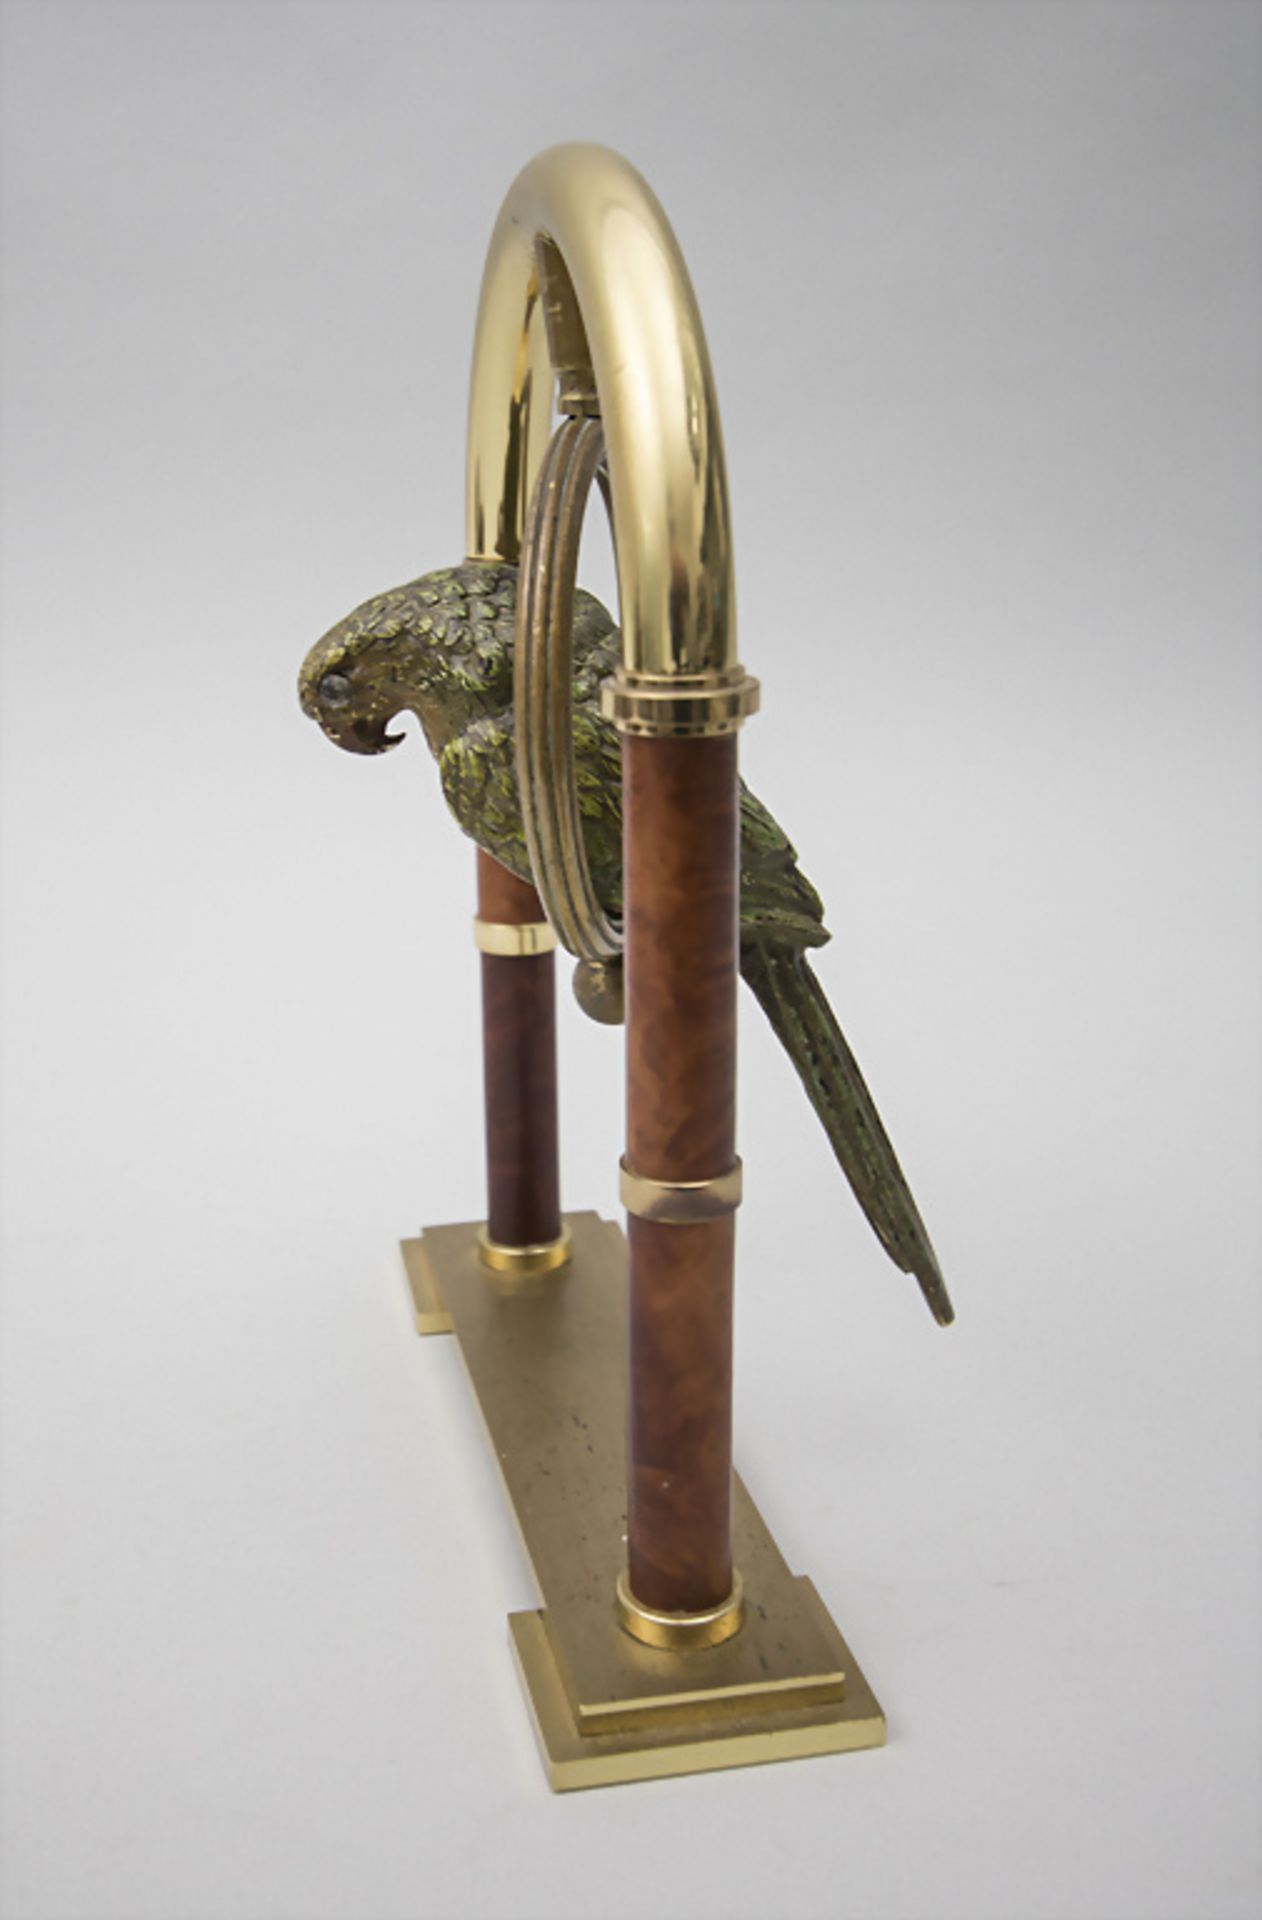 Bronze Papagei / A bronze parrot, 20. Jh. - Image 5 of 6